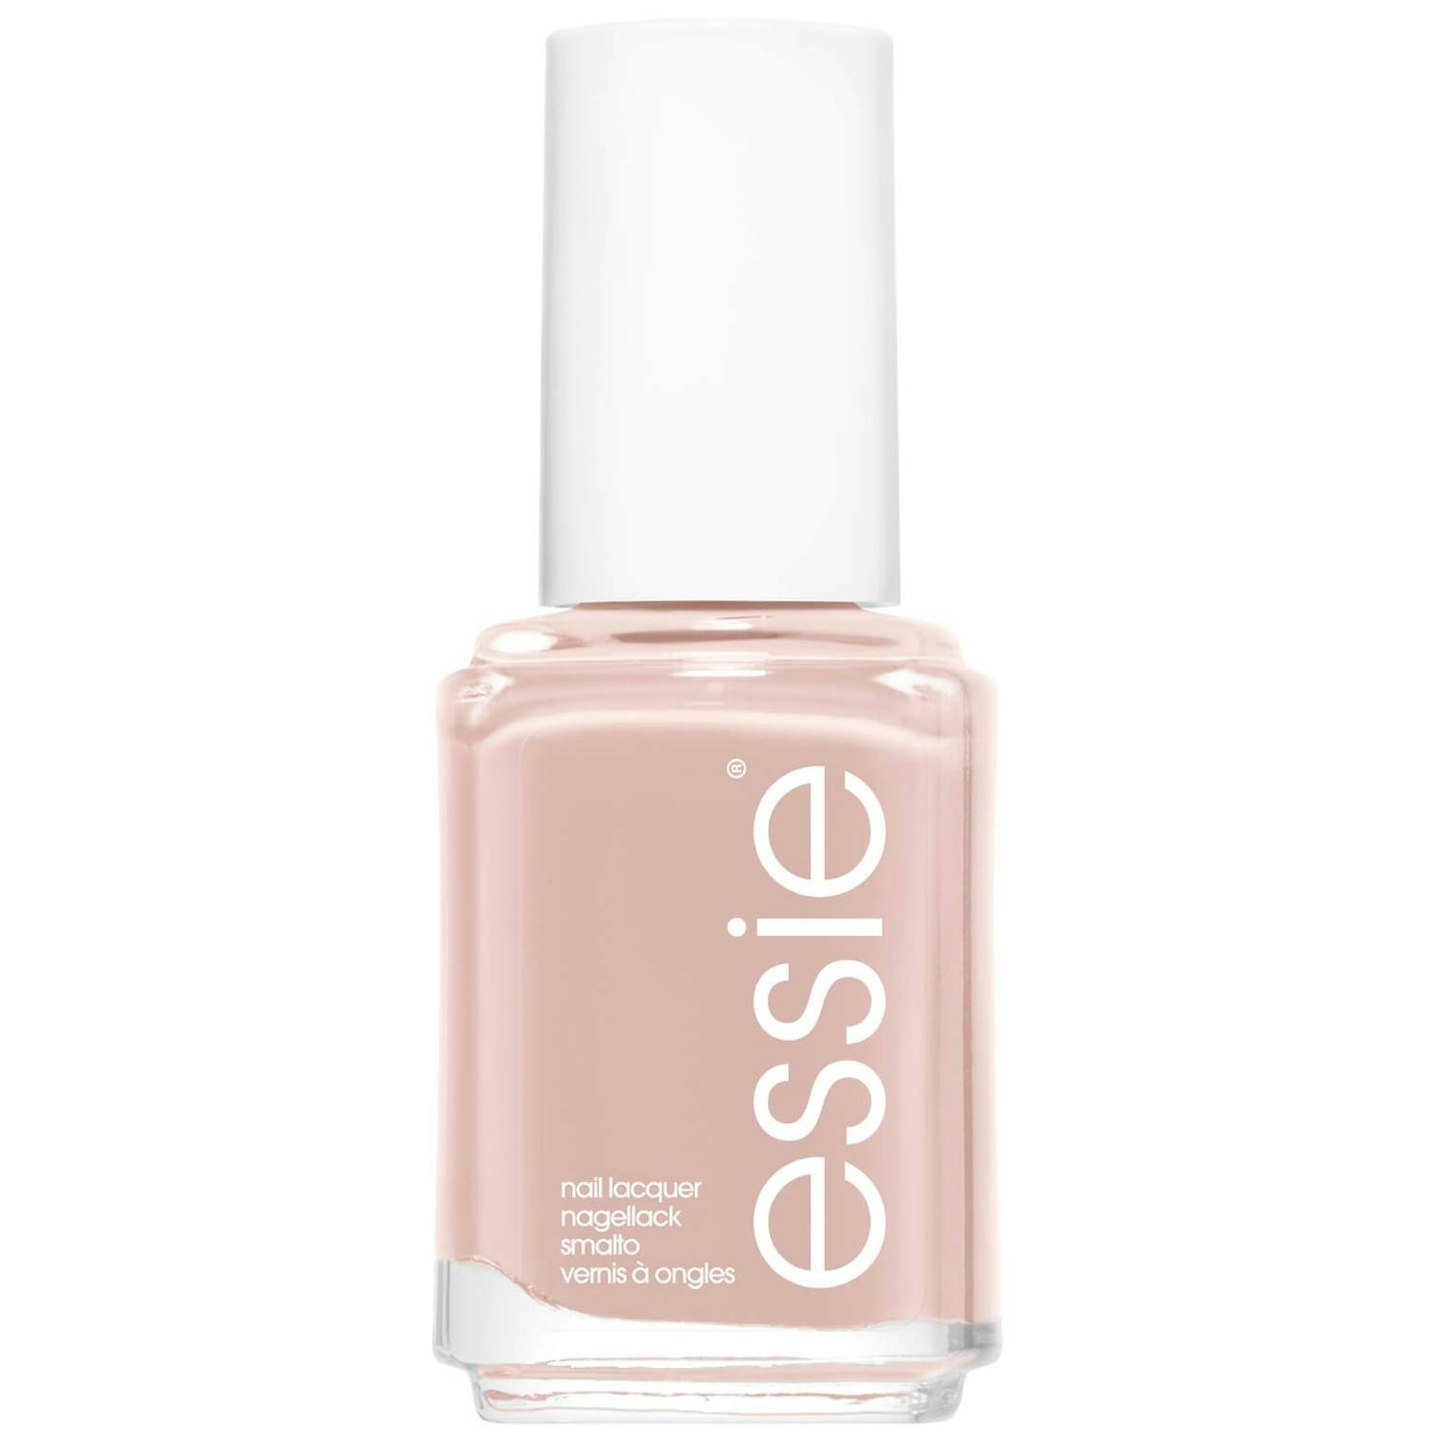 Essie Nail Polish in 11 Not Just A Pretty Face